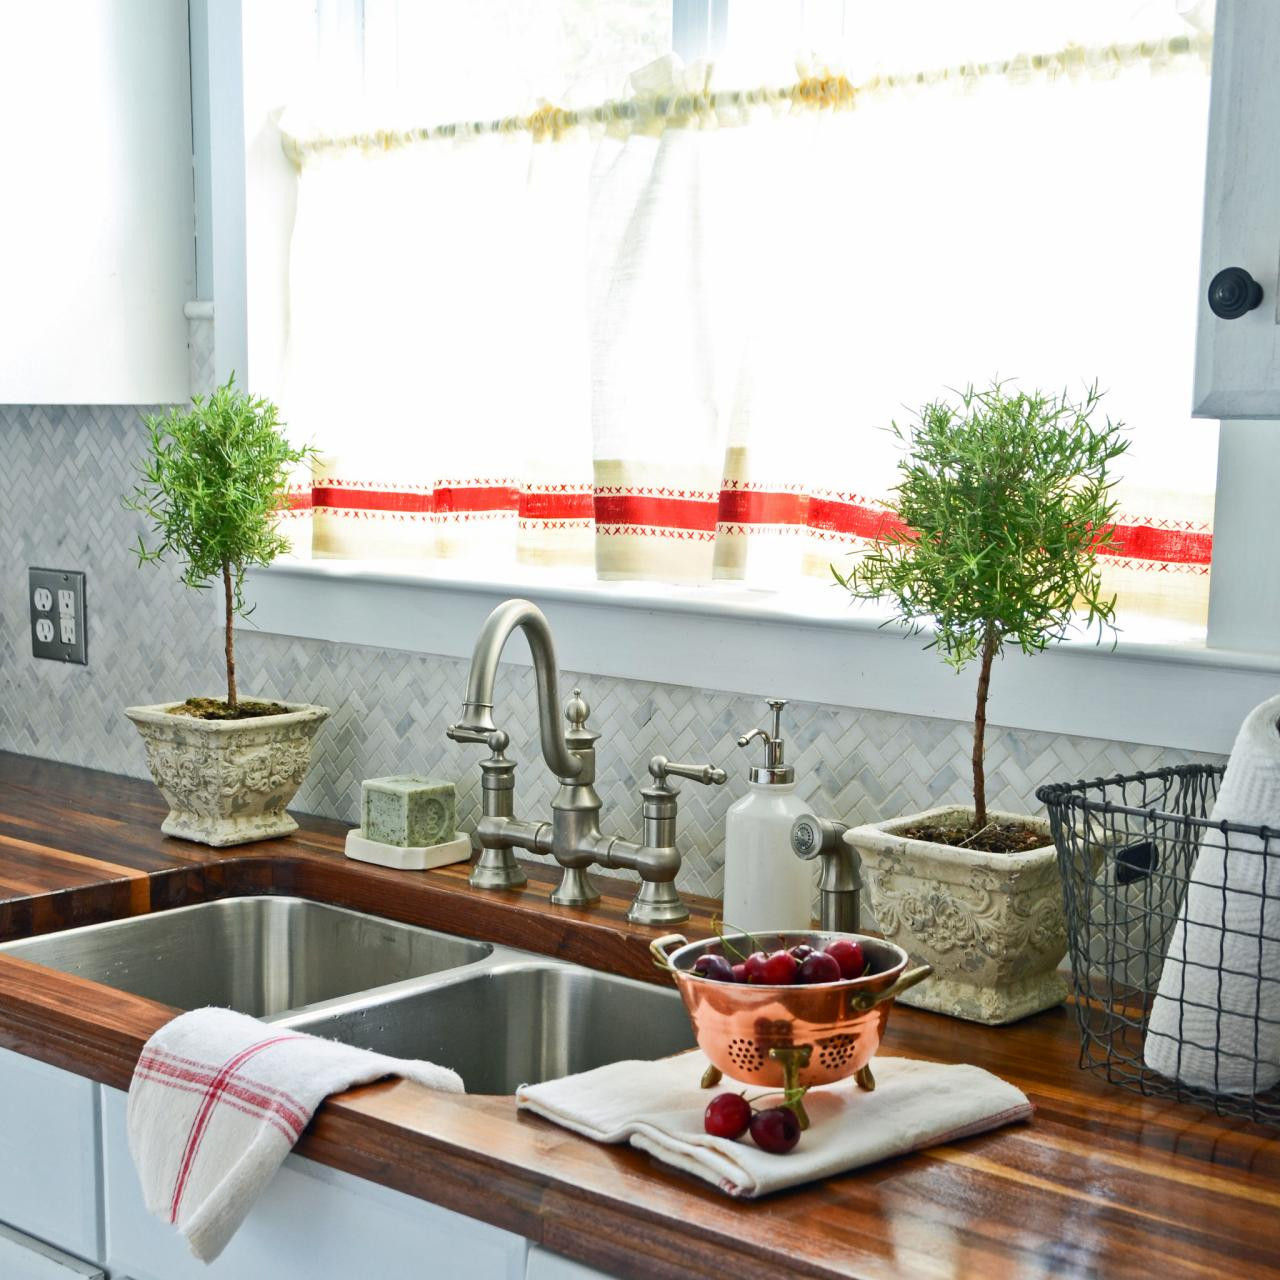 How to Decorate Kitchen Counters: HGTV Pictures & Ideas  HGTV